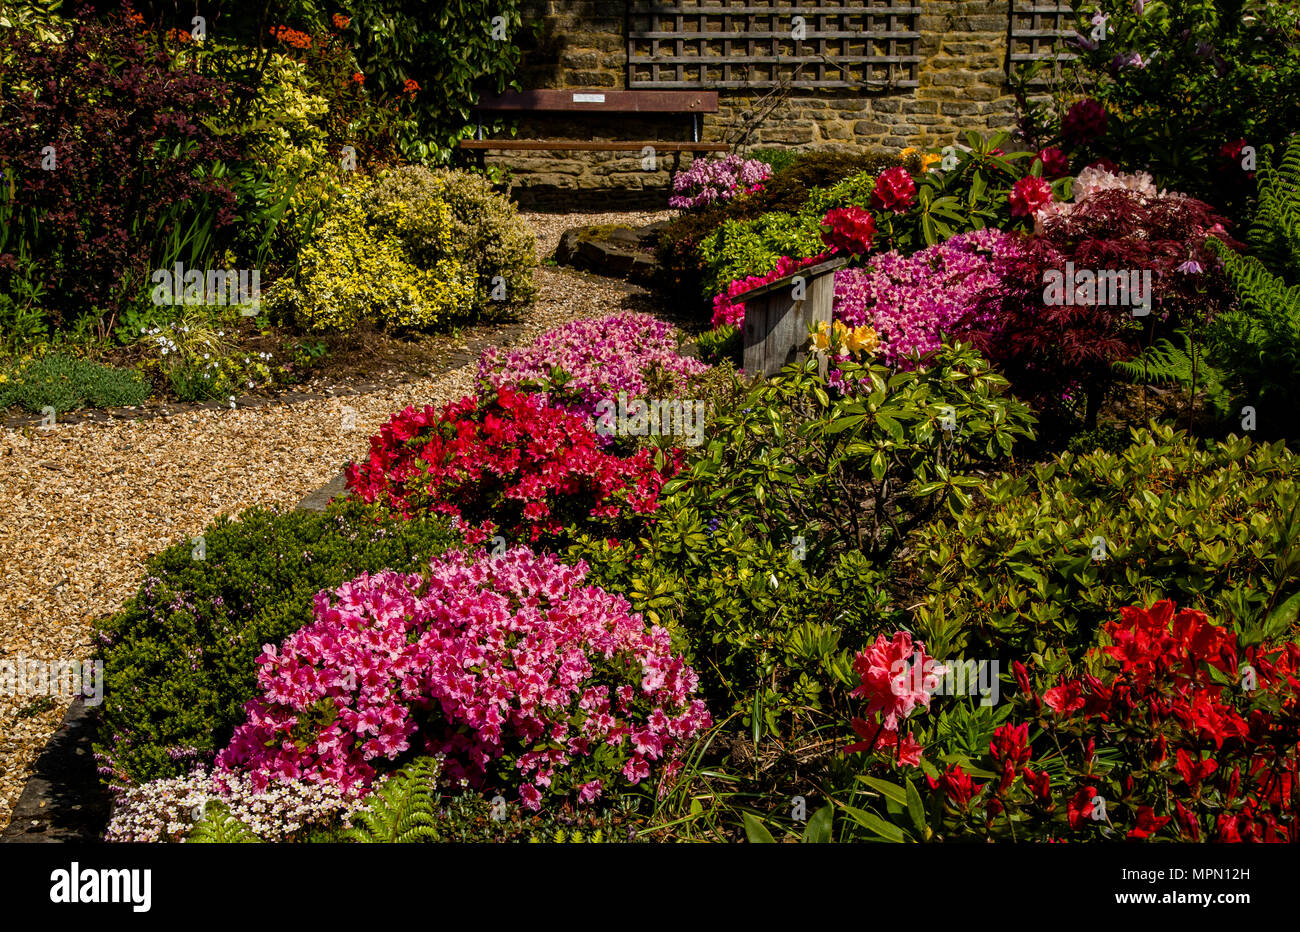 A spring flower bed. Spring colour where azaleas, lavender, ferns and variegated leaves provide colour in the garden. Stock Photo